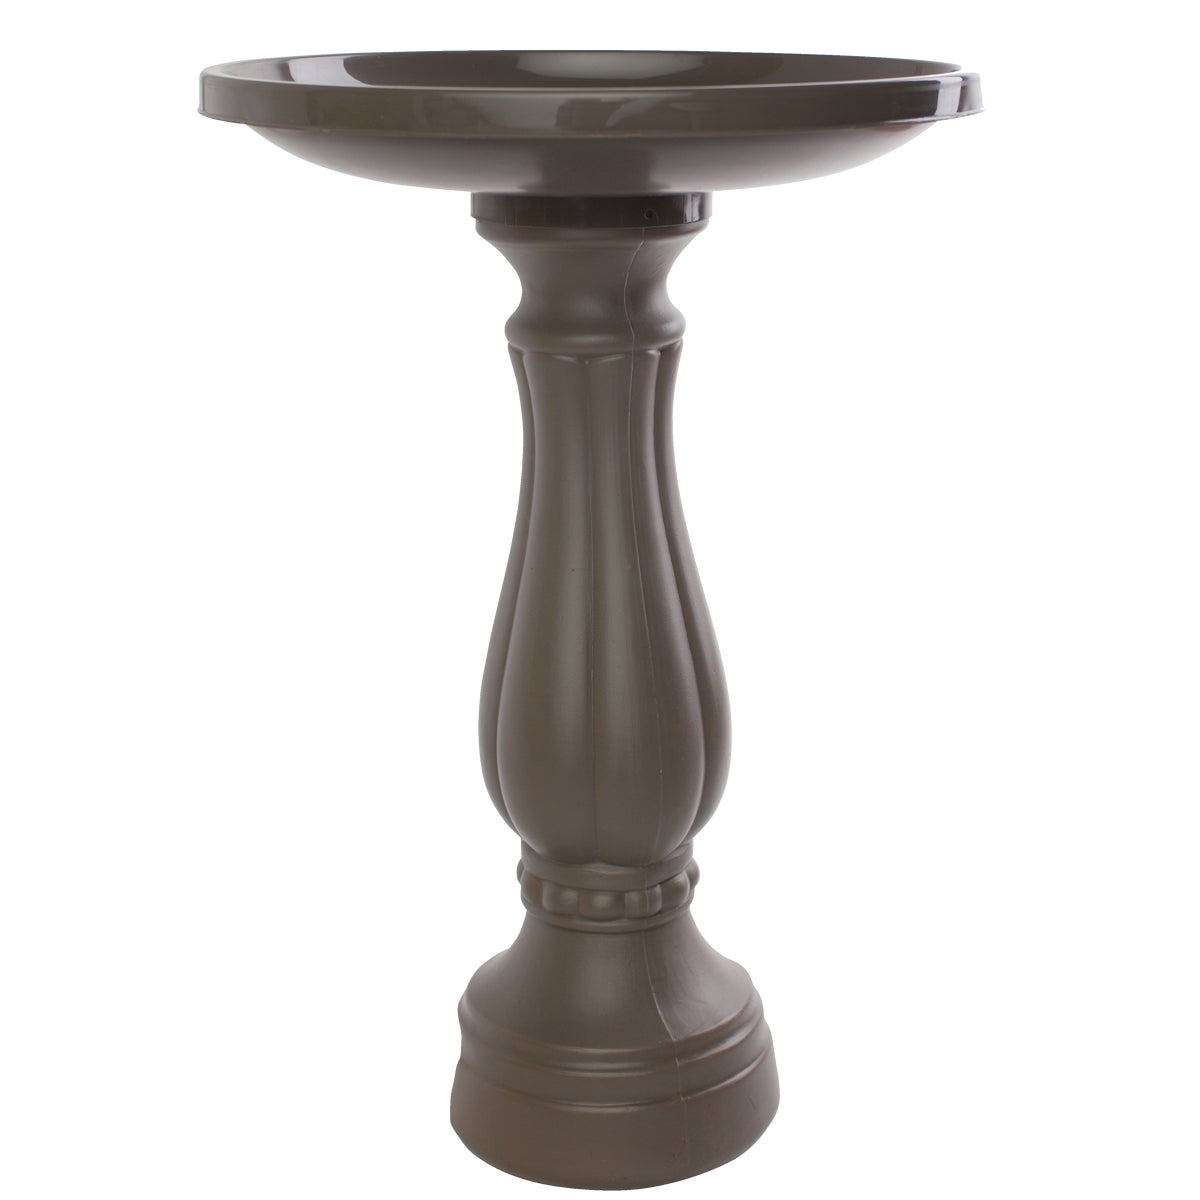 Item 703255, Bird Bath with pedestal. Features a 17 In.